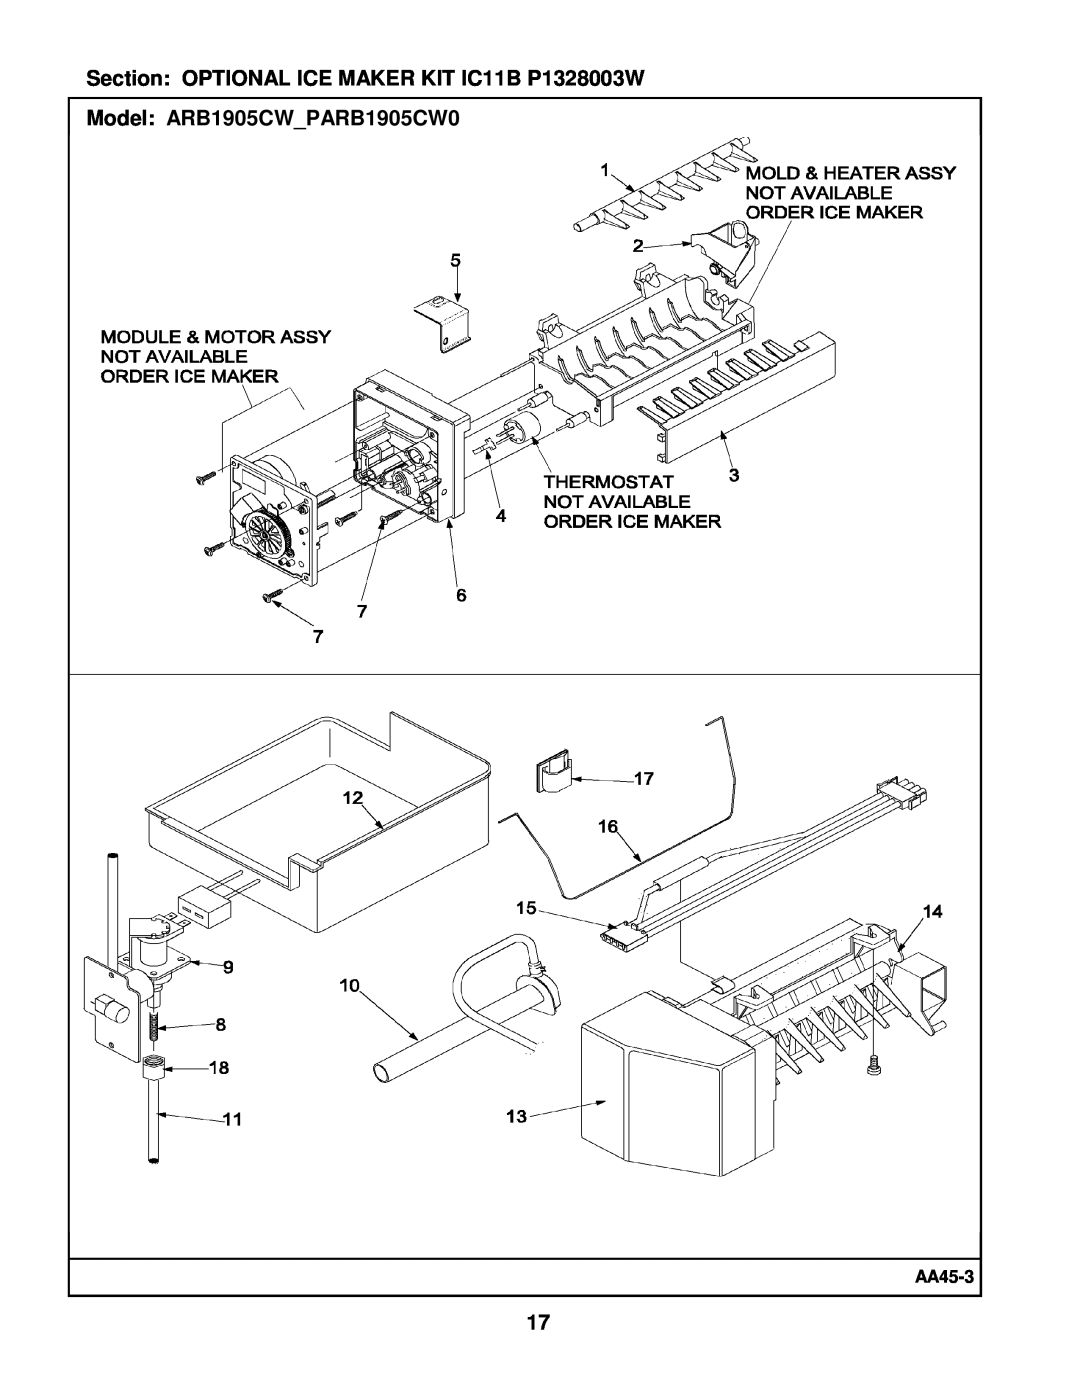 Maytag manual Section: OPTIONAL ICE MAKER KIT IC11B P1328003W, AA45-3, Model ARB1905CW PARB1905CW0 